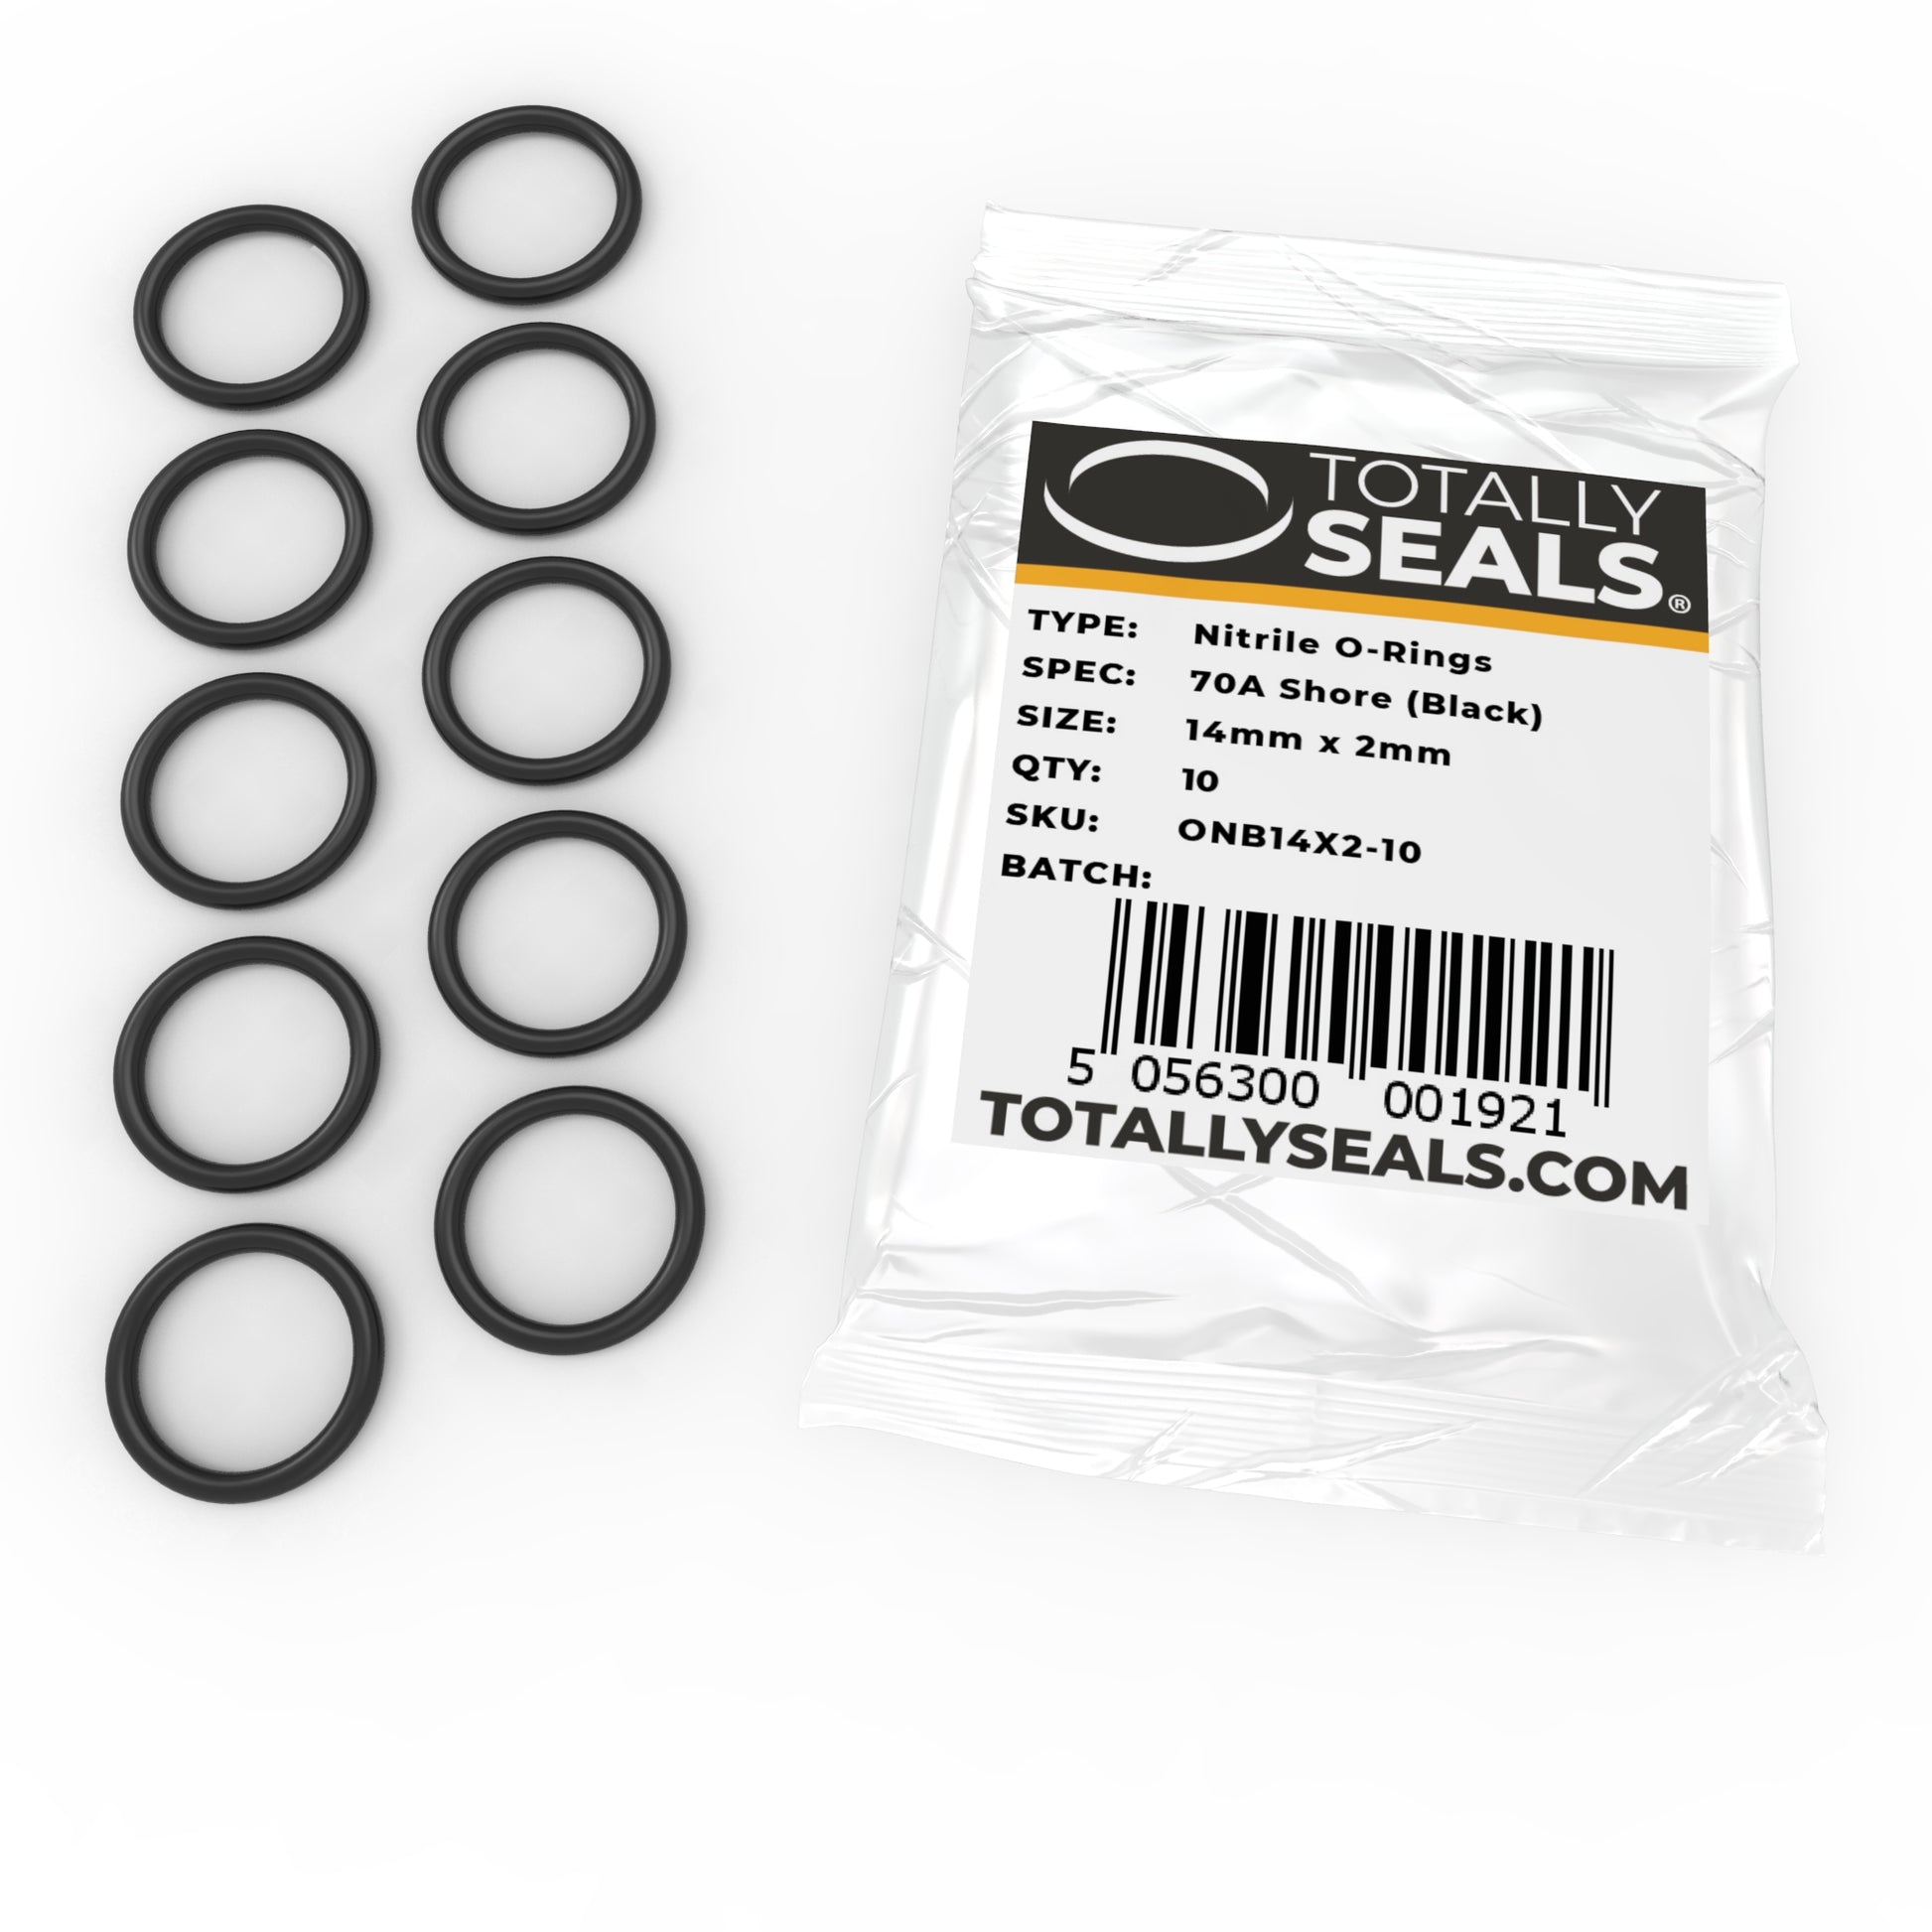 14mm x 2mm (18mm OD) Nitrile O-Rings - Totally Seals®